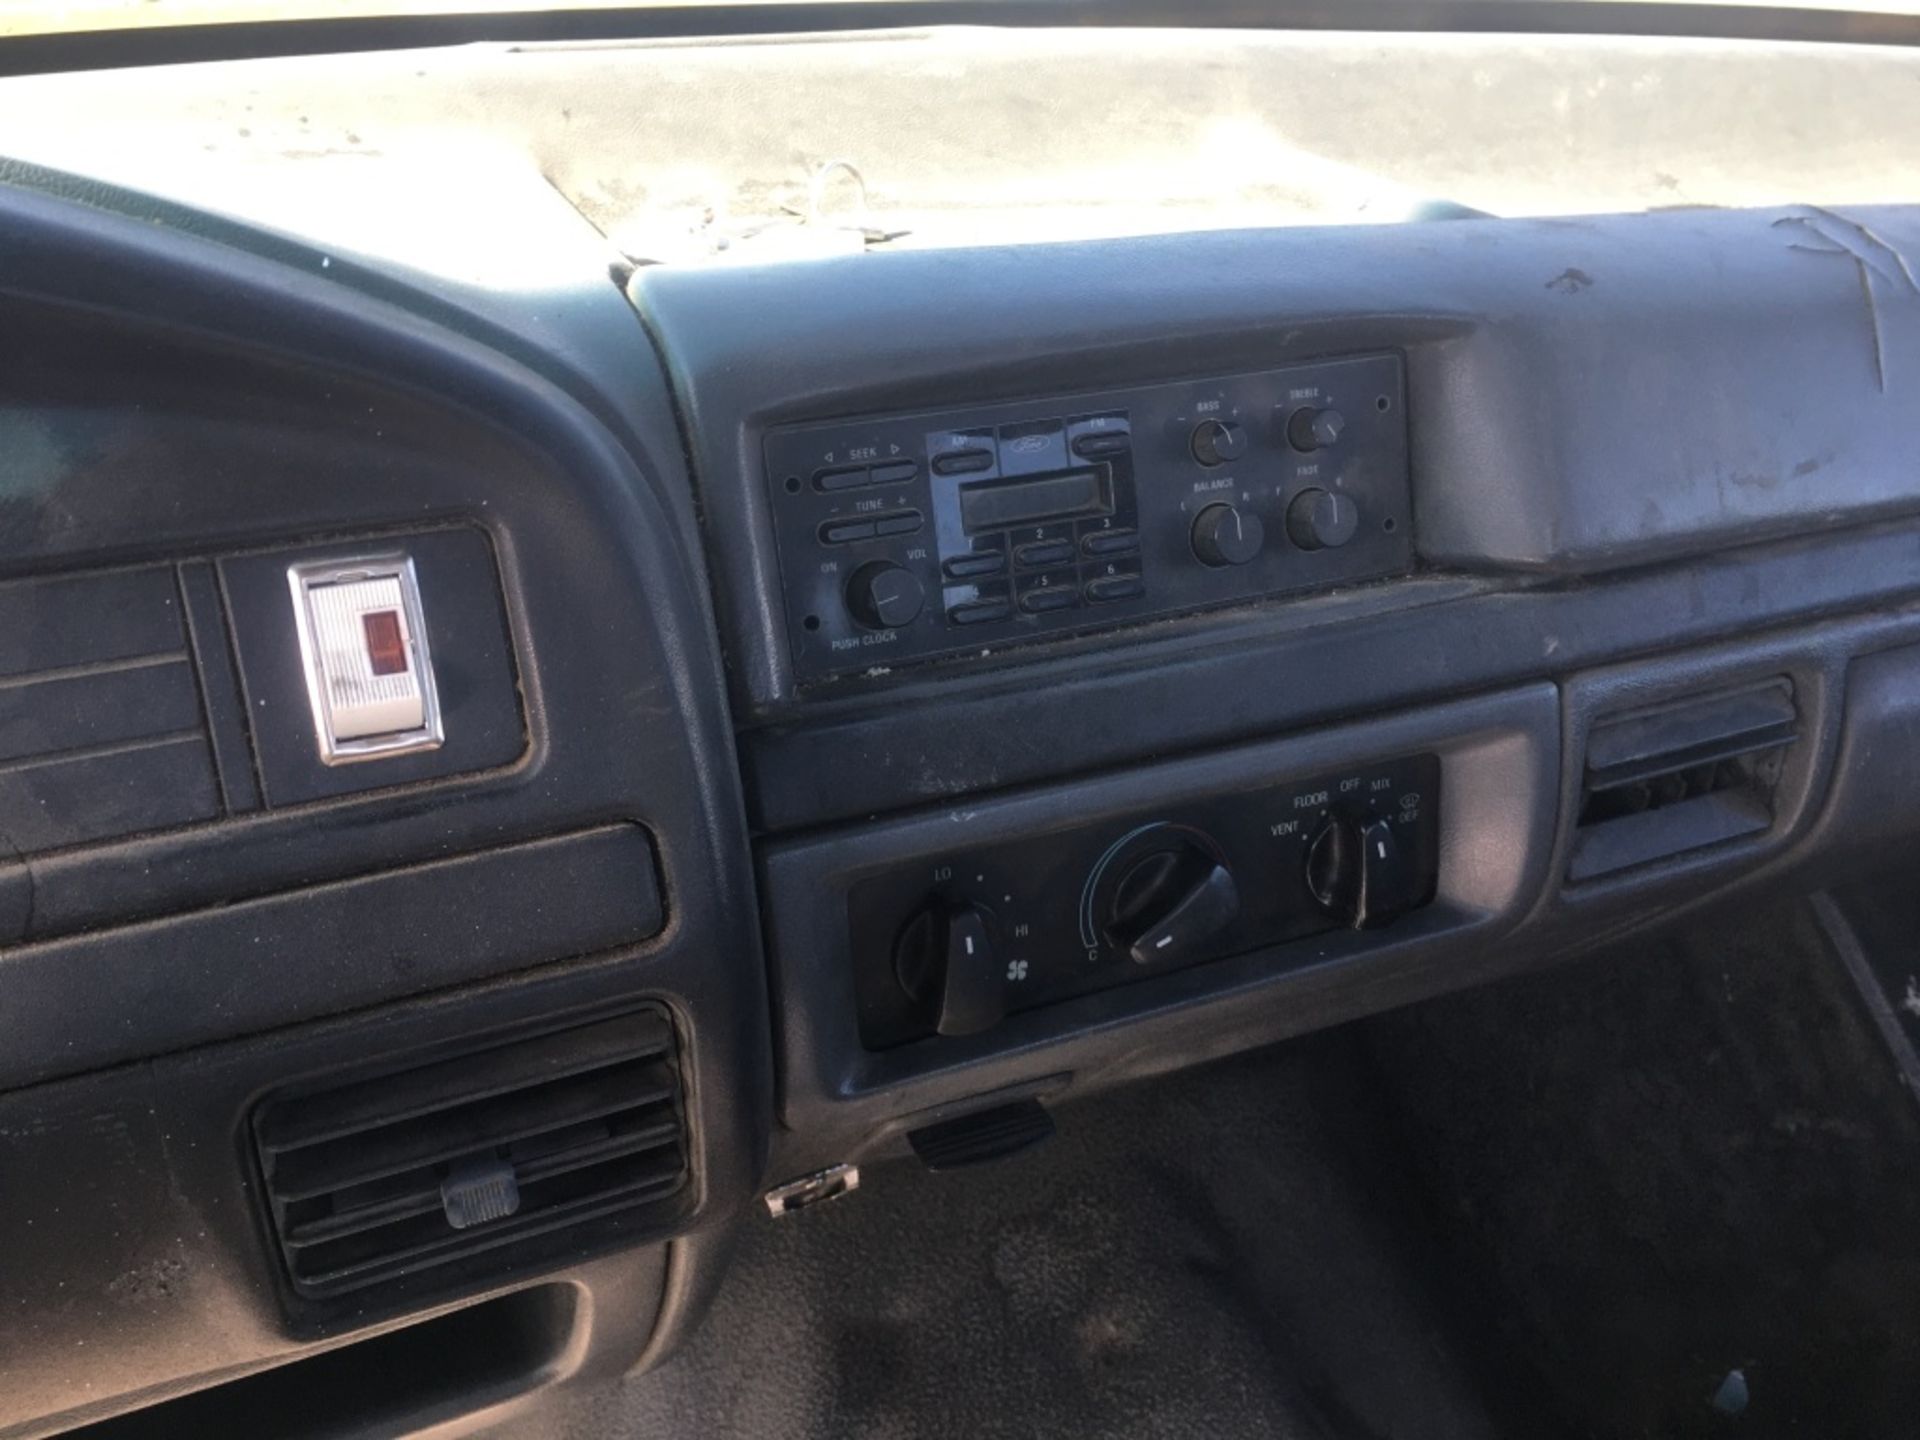 1992 Ford F250 4x4 Pickup - Image 10 of 16